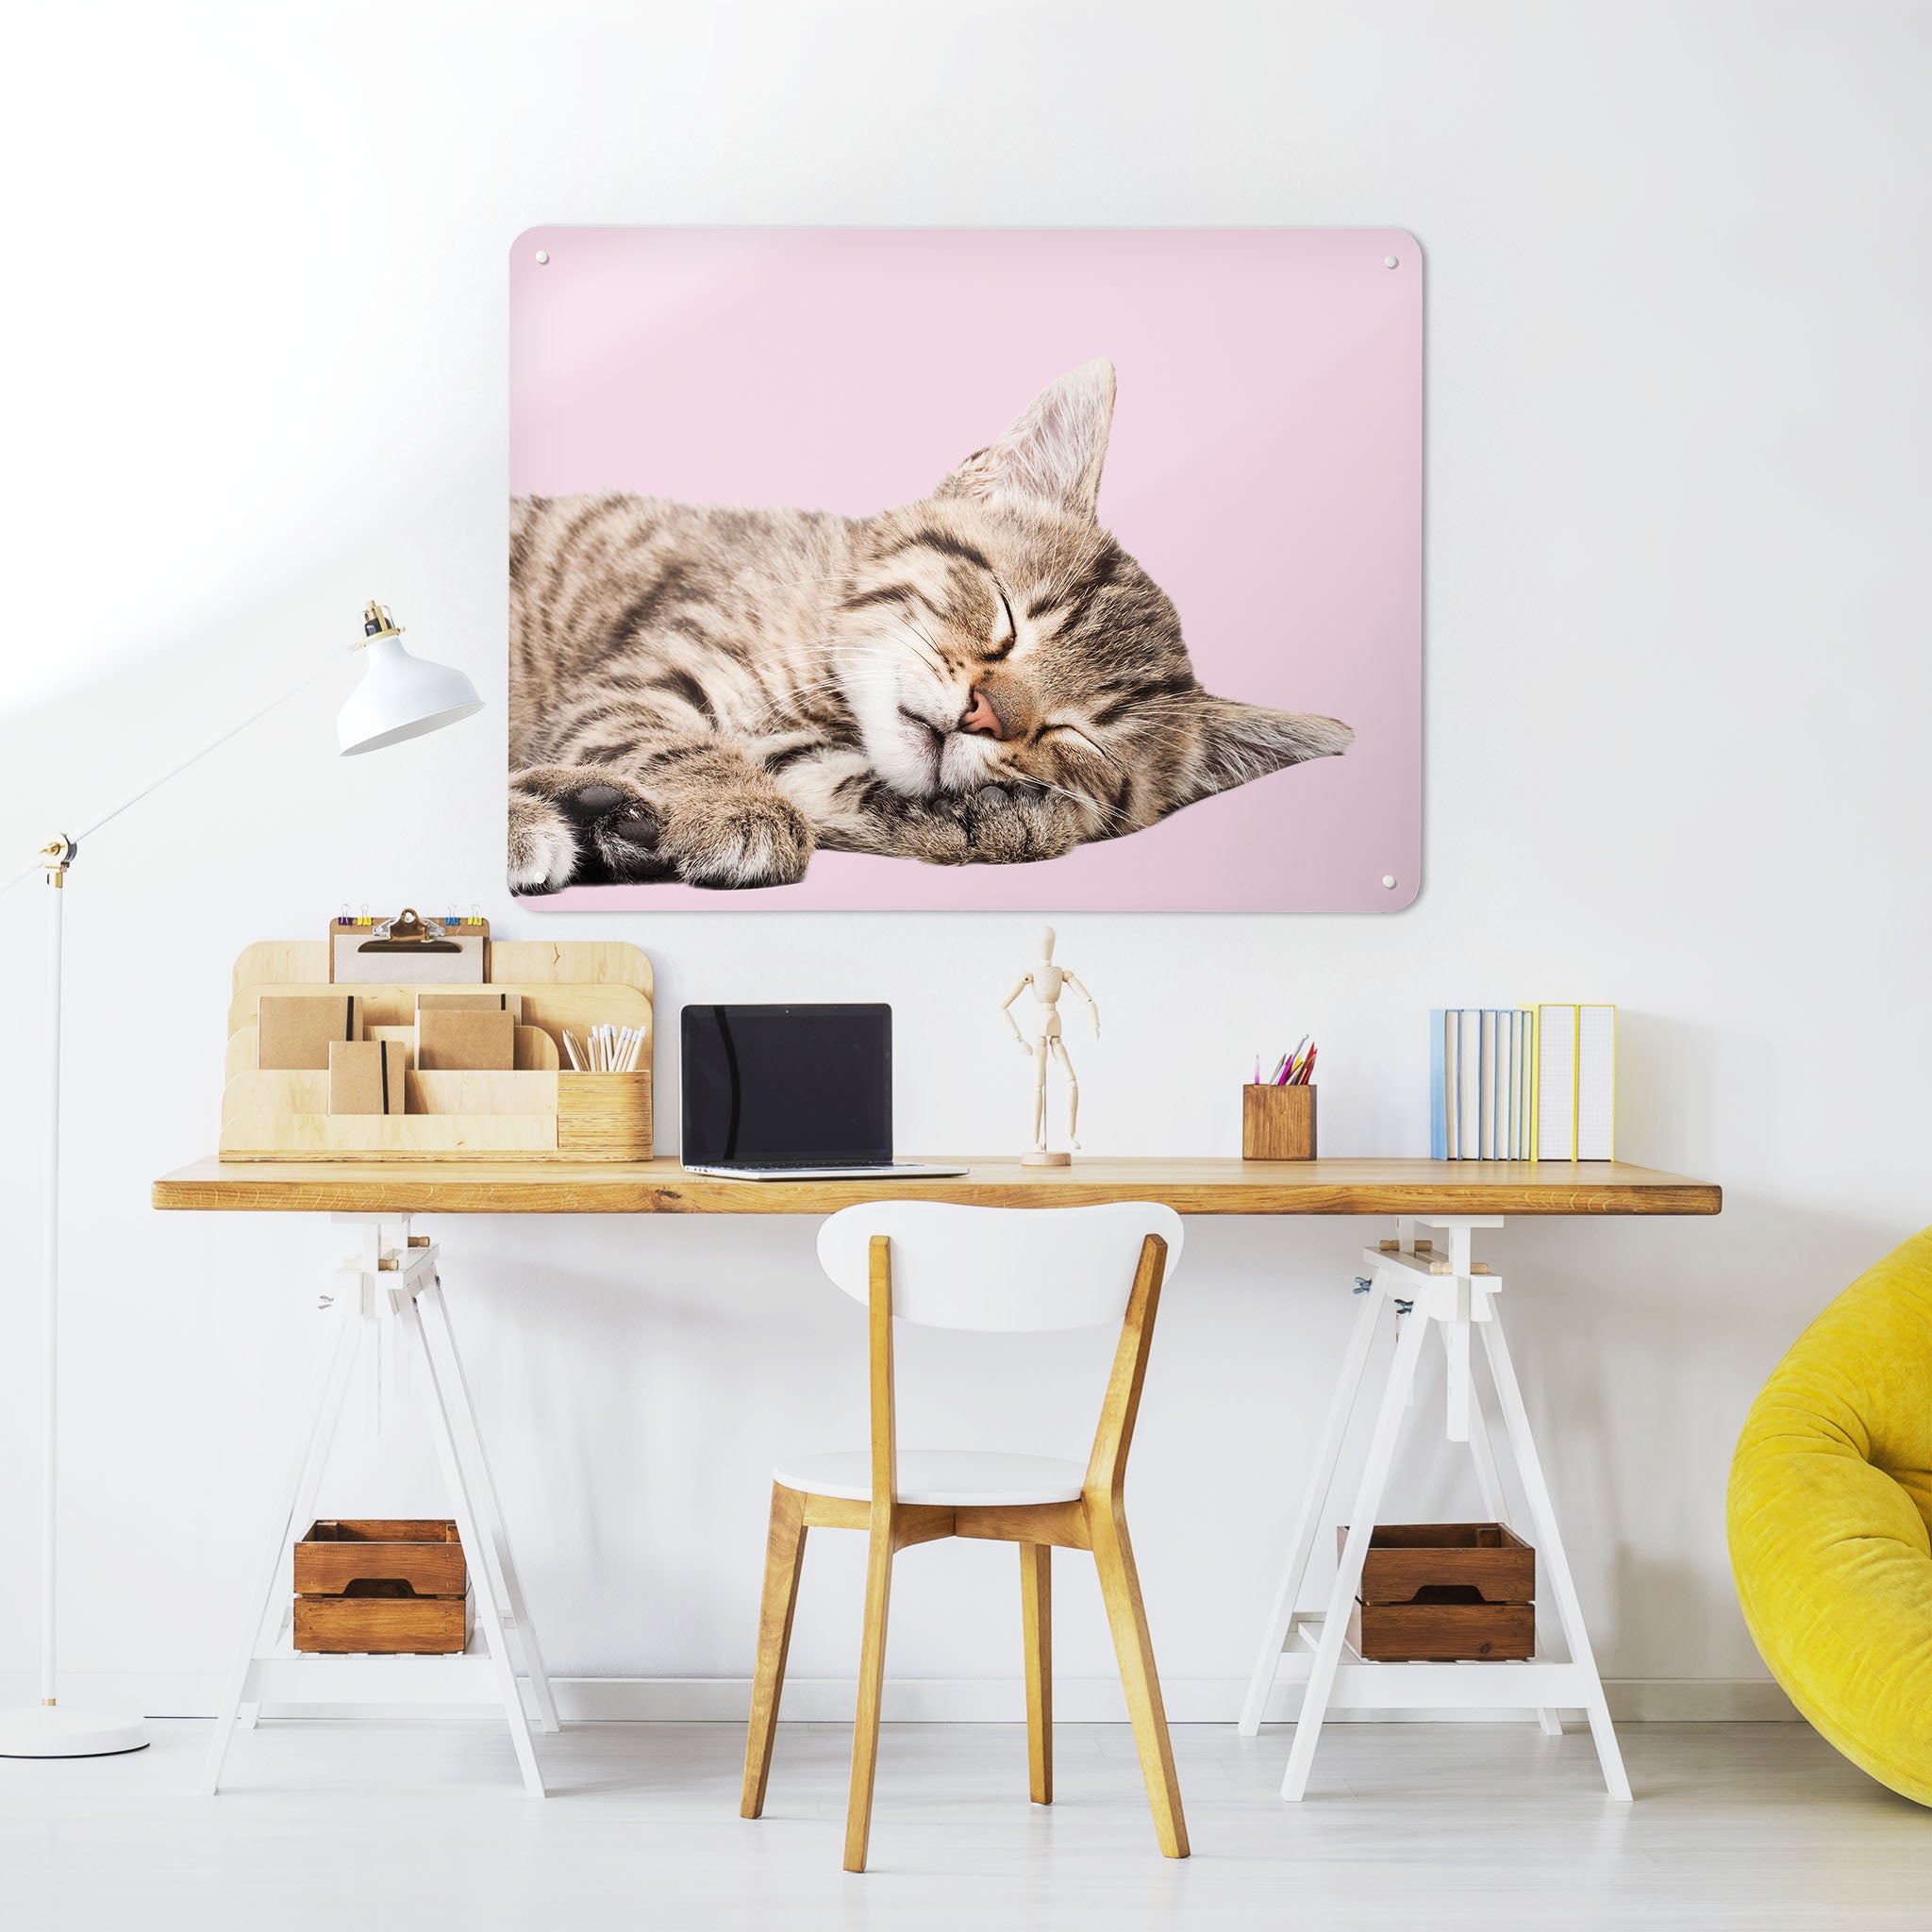 A desk in a workspace setting in a white interior with a magnetic metal wall art panel showing a photograph of a sleeping tabby kitten on a pink background